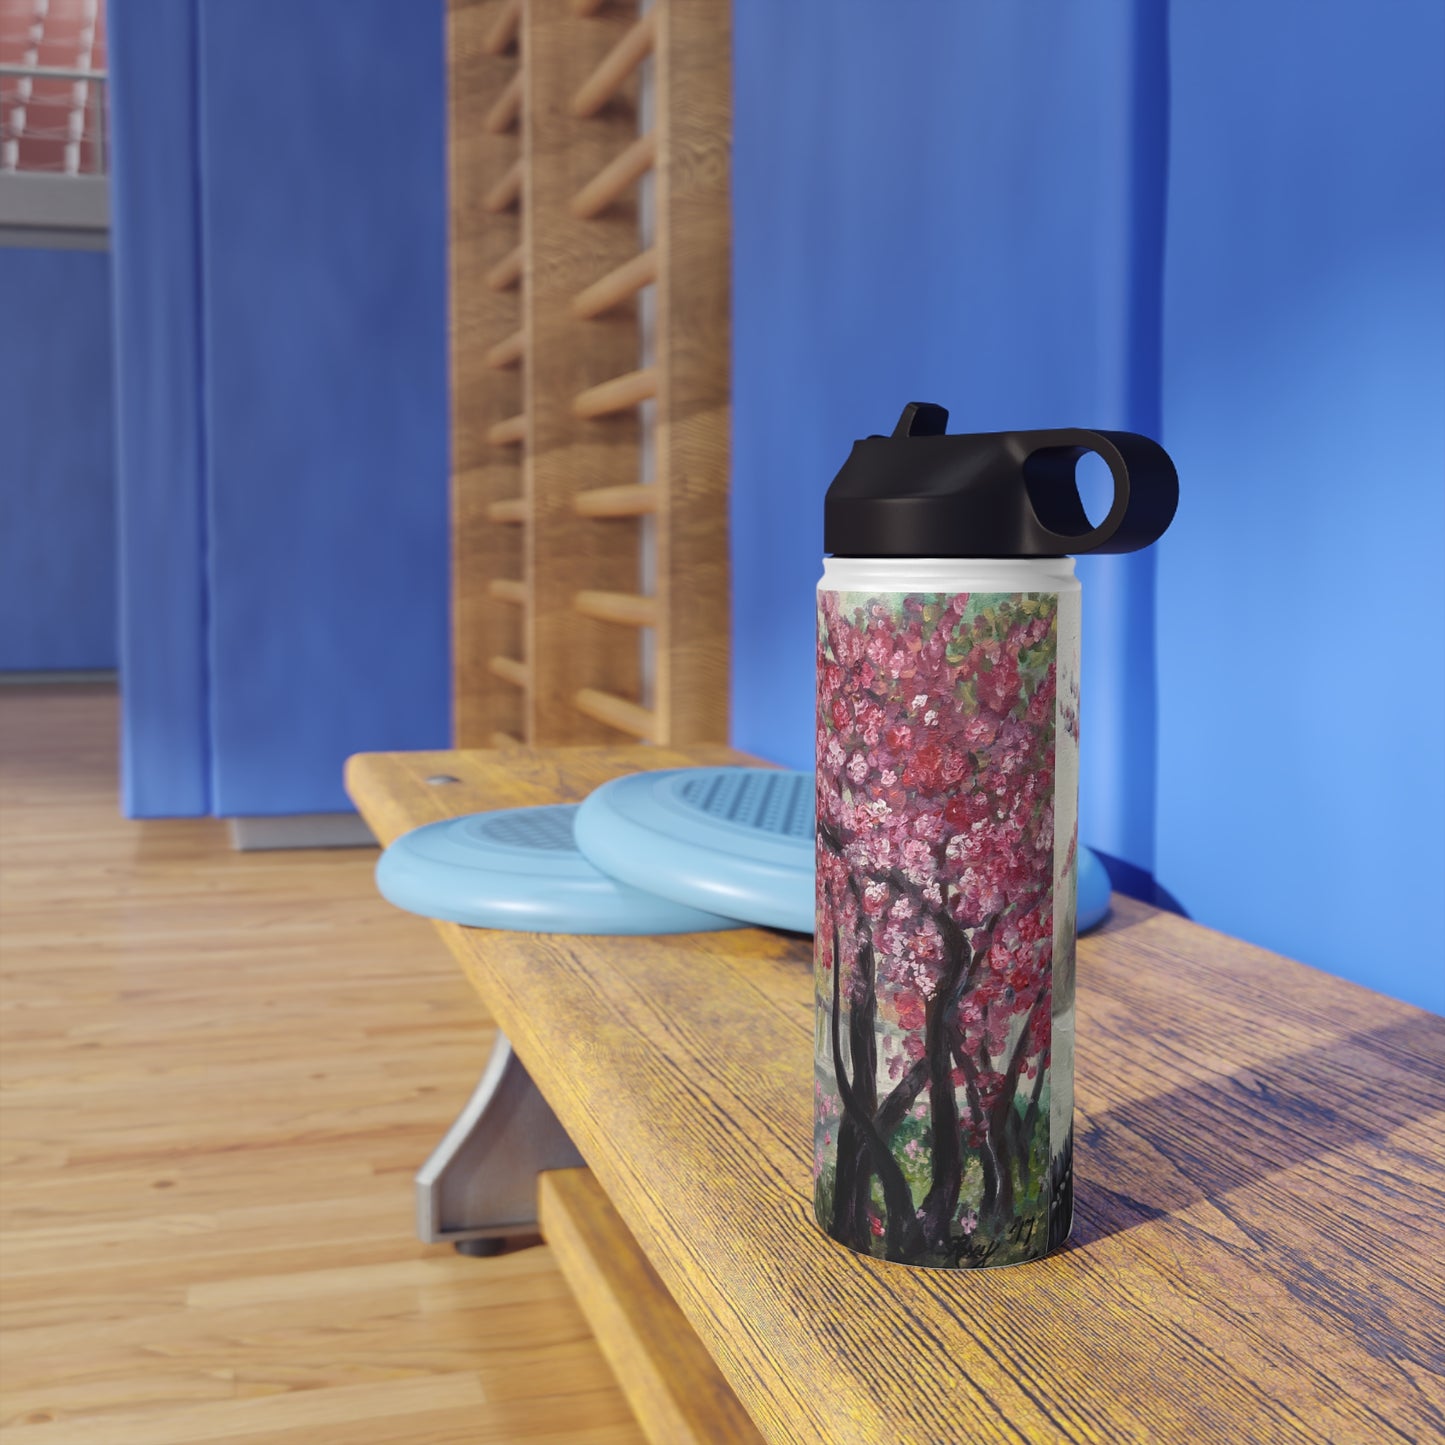 April in Paris Cherry Blossoms Stainless Steel Water Bottle, Standard Lid